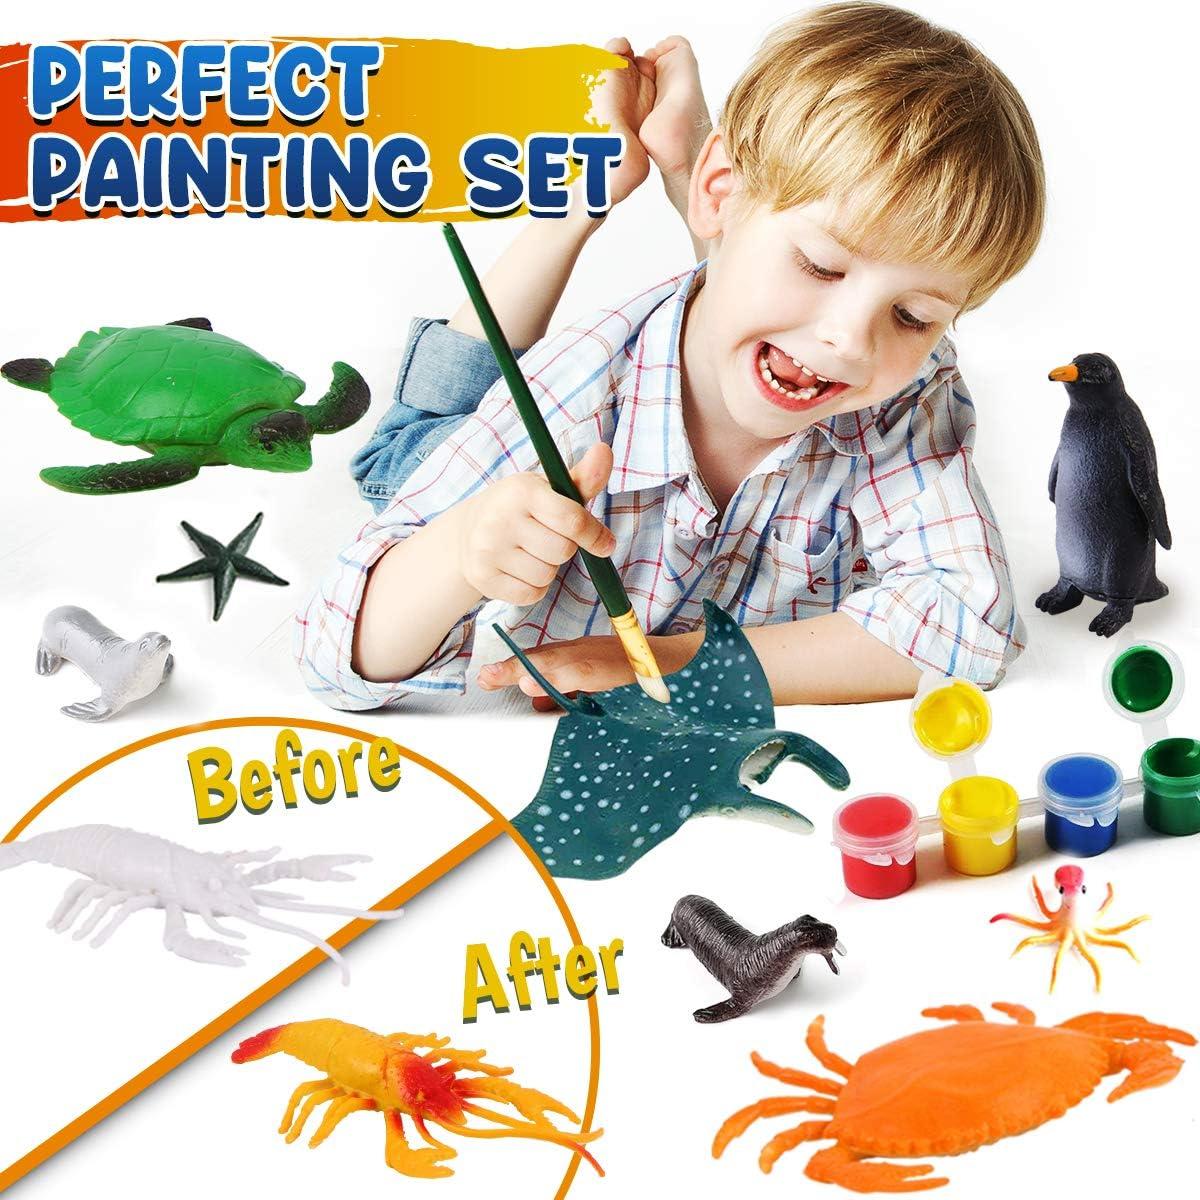 FunzBo Arts and Crafts Supplies for Kids - Craft Art Supply Kit